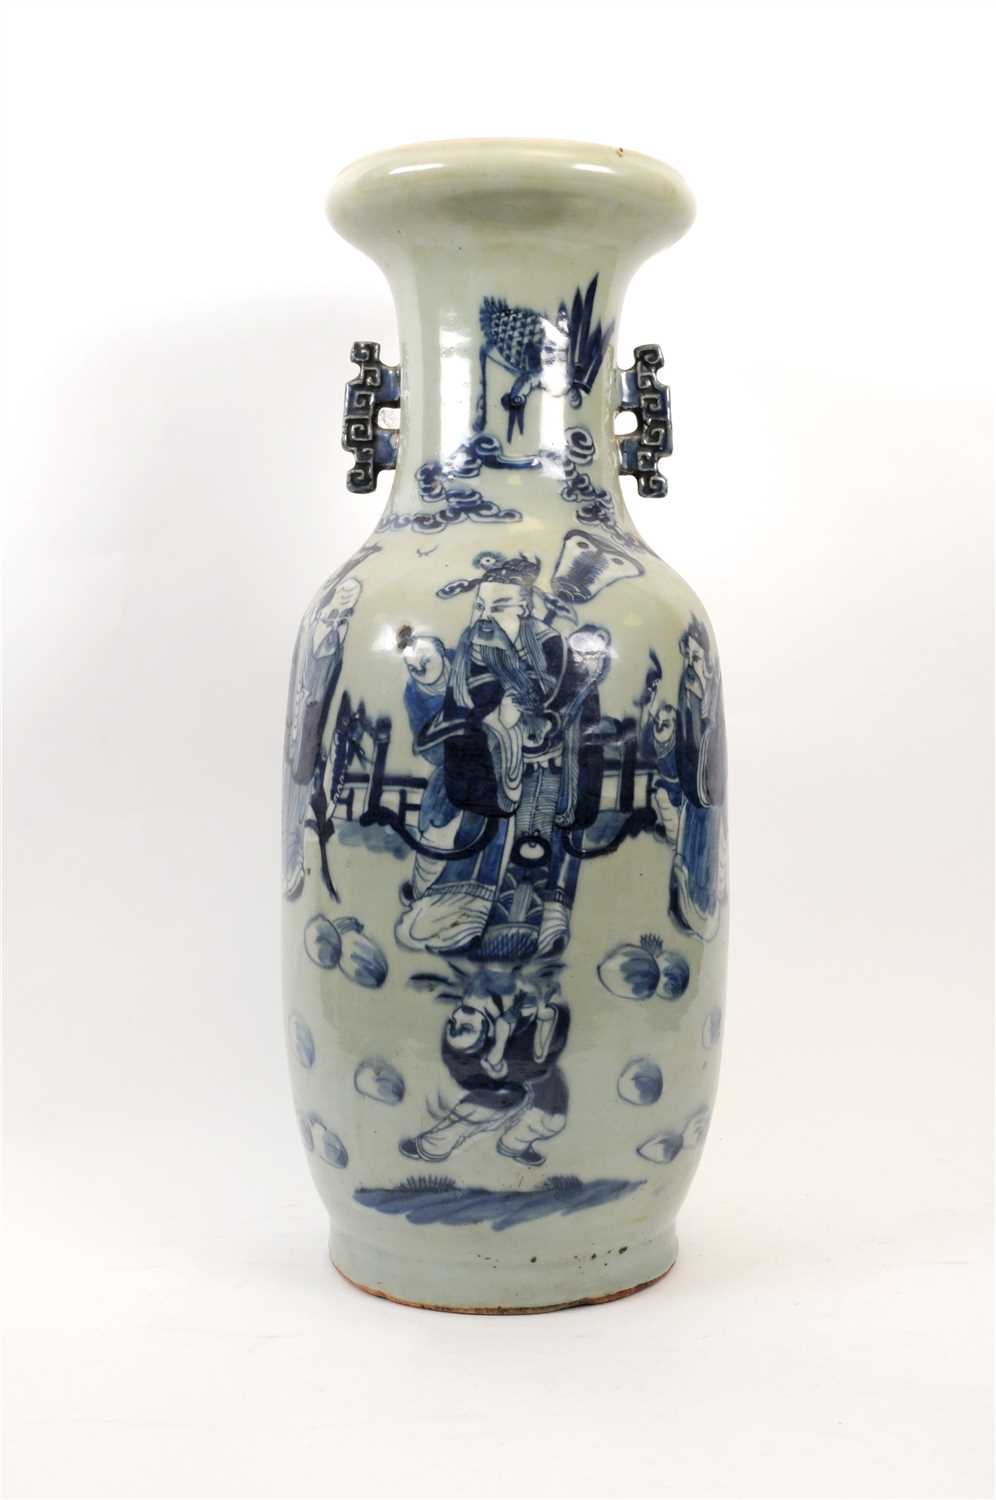 Lot 523 - A large late 19th century Chinese blue and white porcelain vase